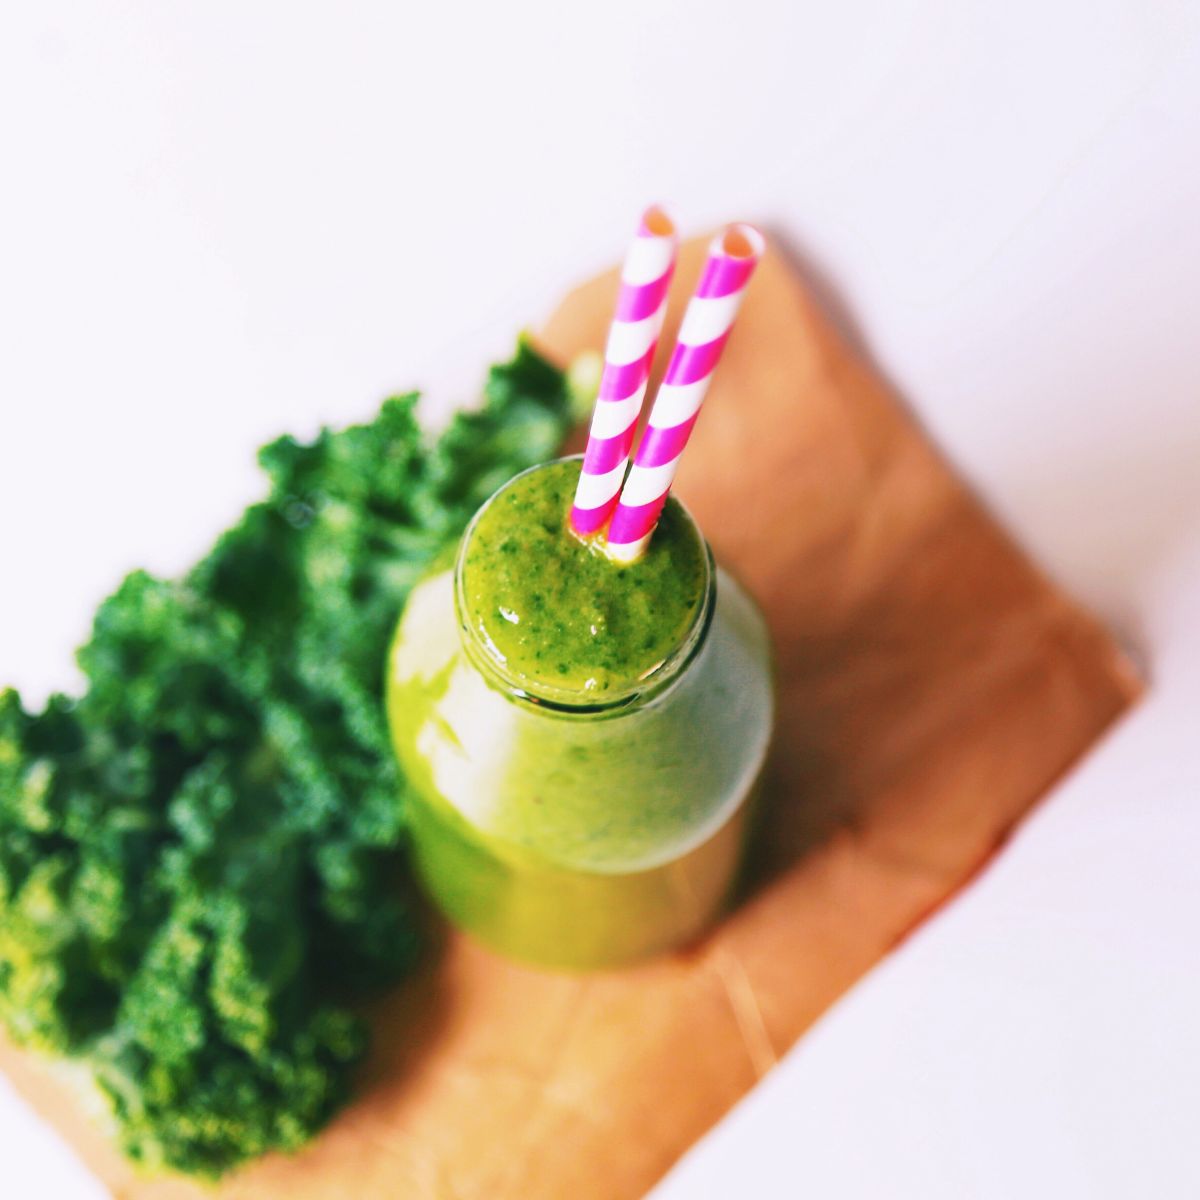 The Best Green Detox and Slimming Smoothie of the Year: Lemon, Mango and Kale | The State